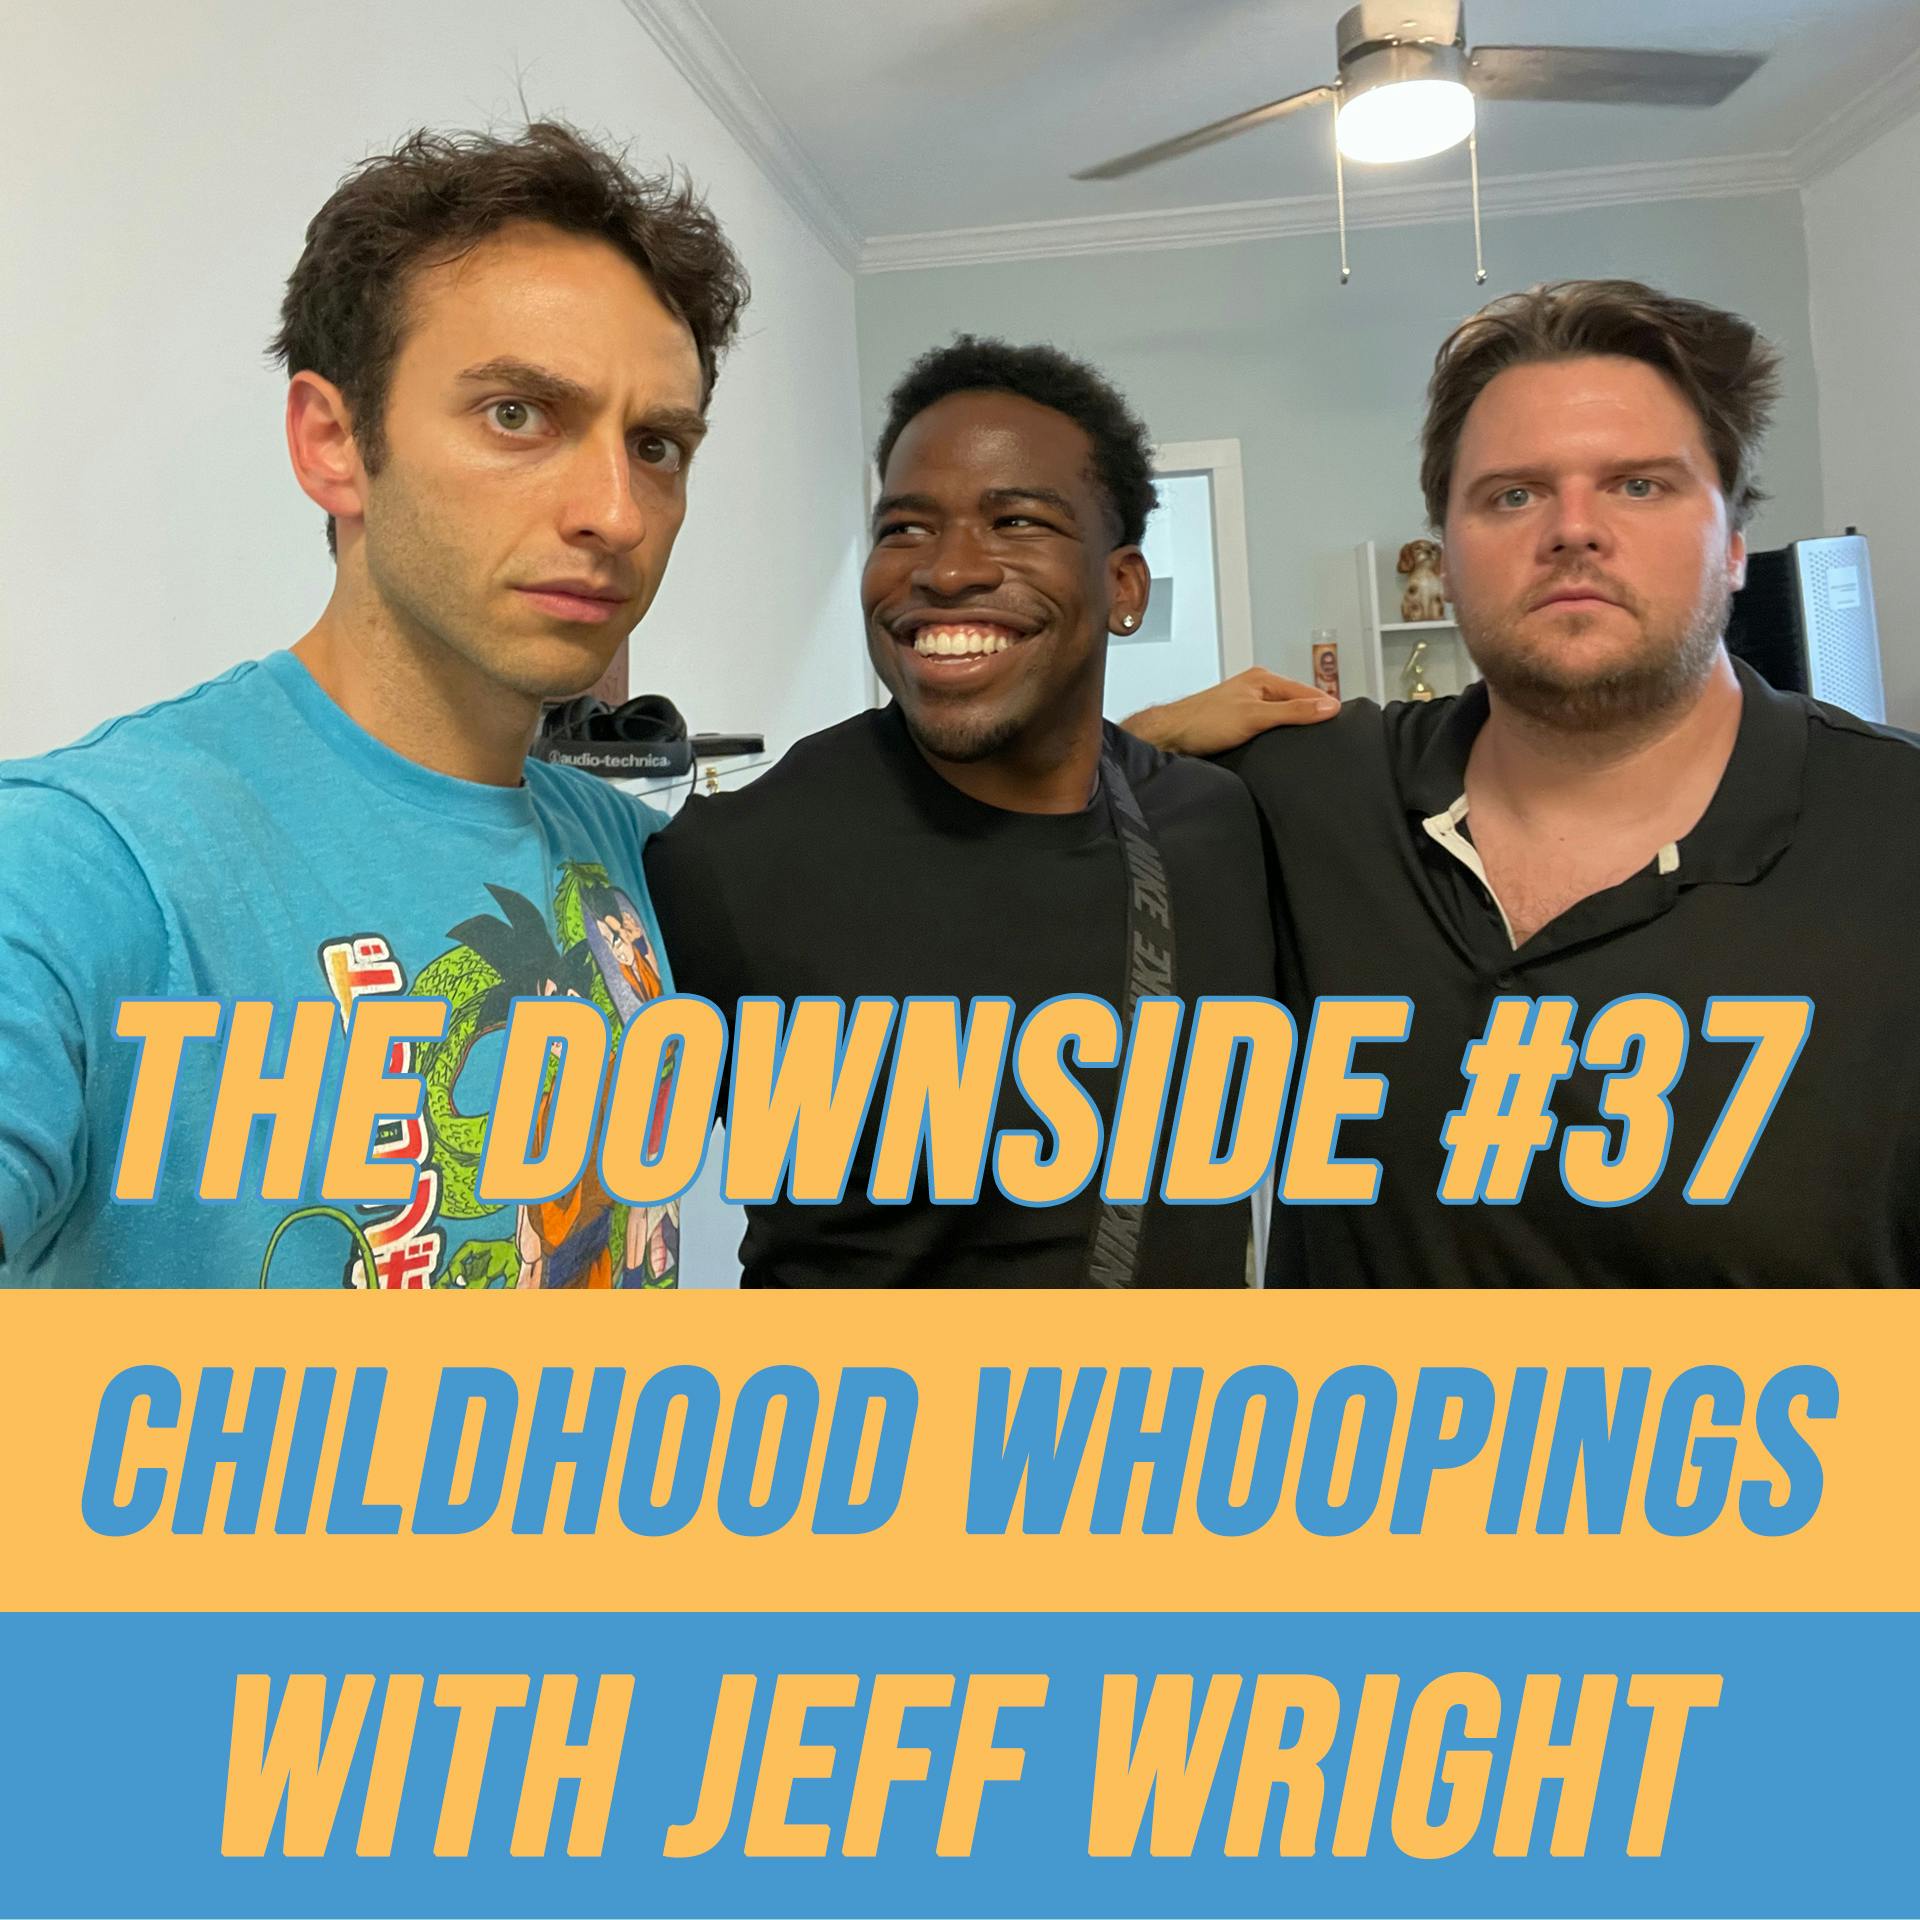 #37 Childhood Whoopings with Jeff Wright